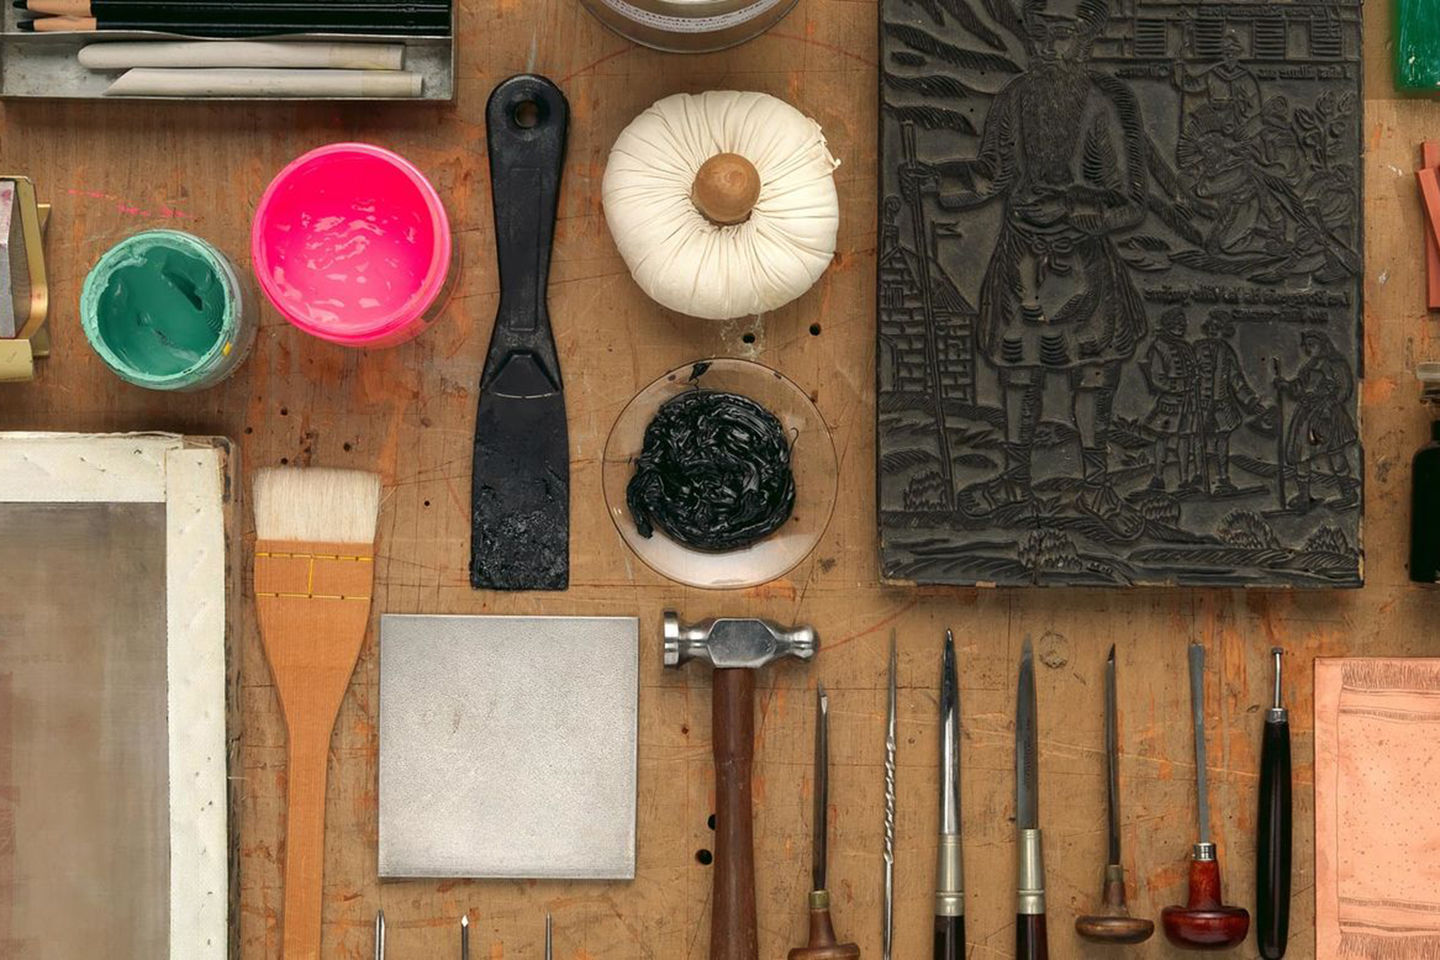 A table set with a neat arrangement of various printmaking materials and tools.